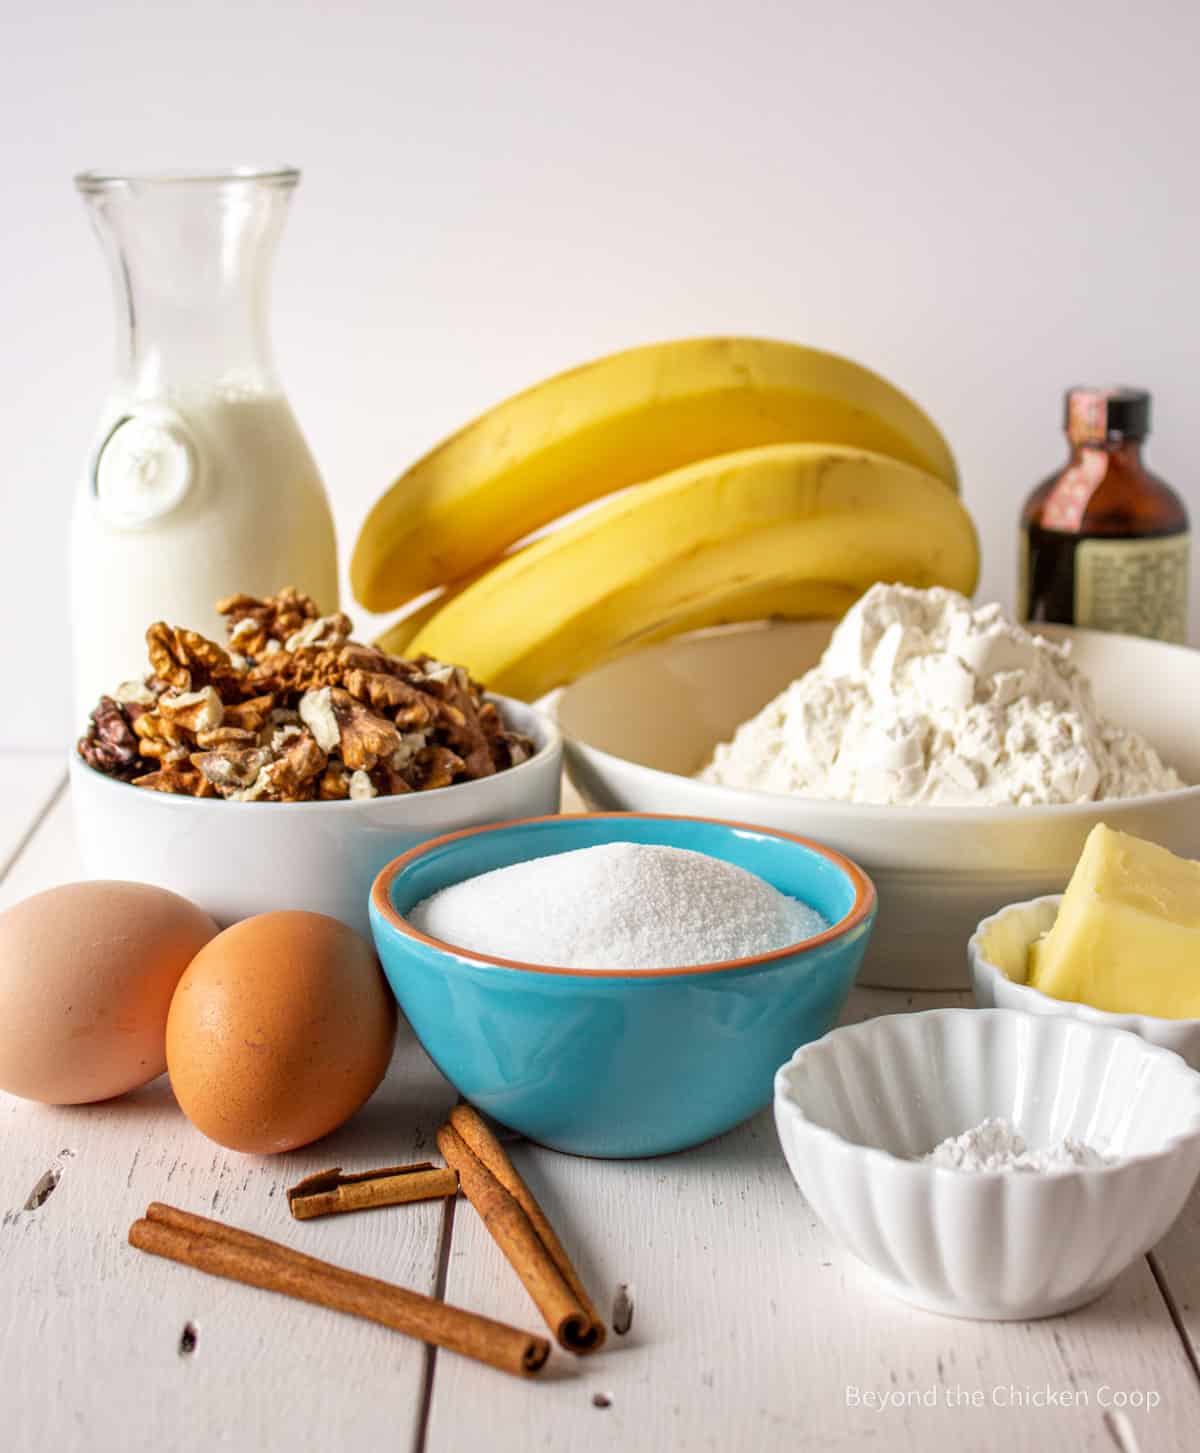 Ingredients for making banana nut muffins.